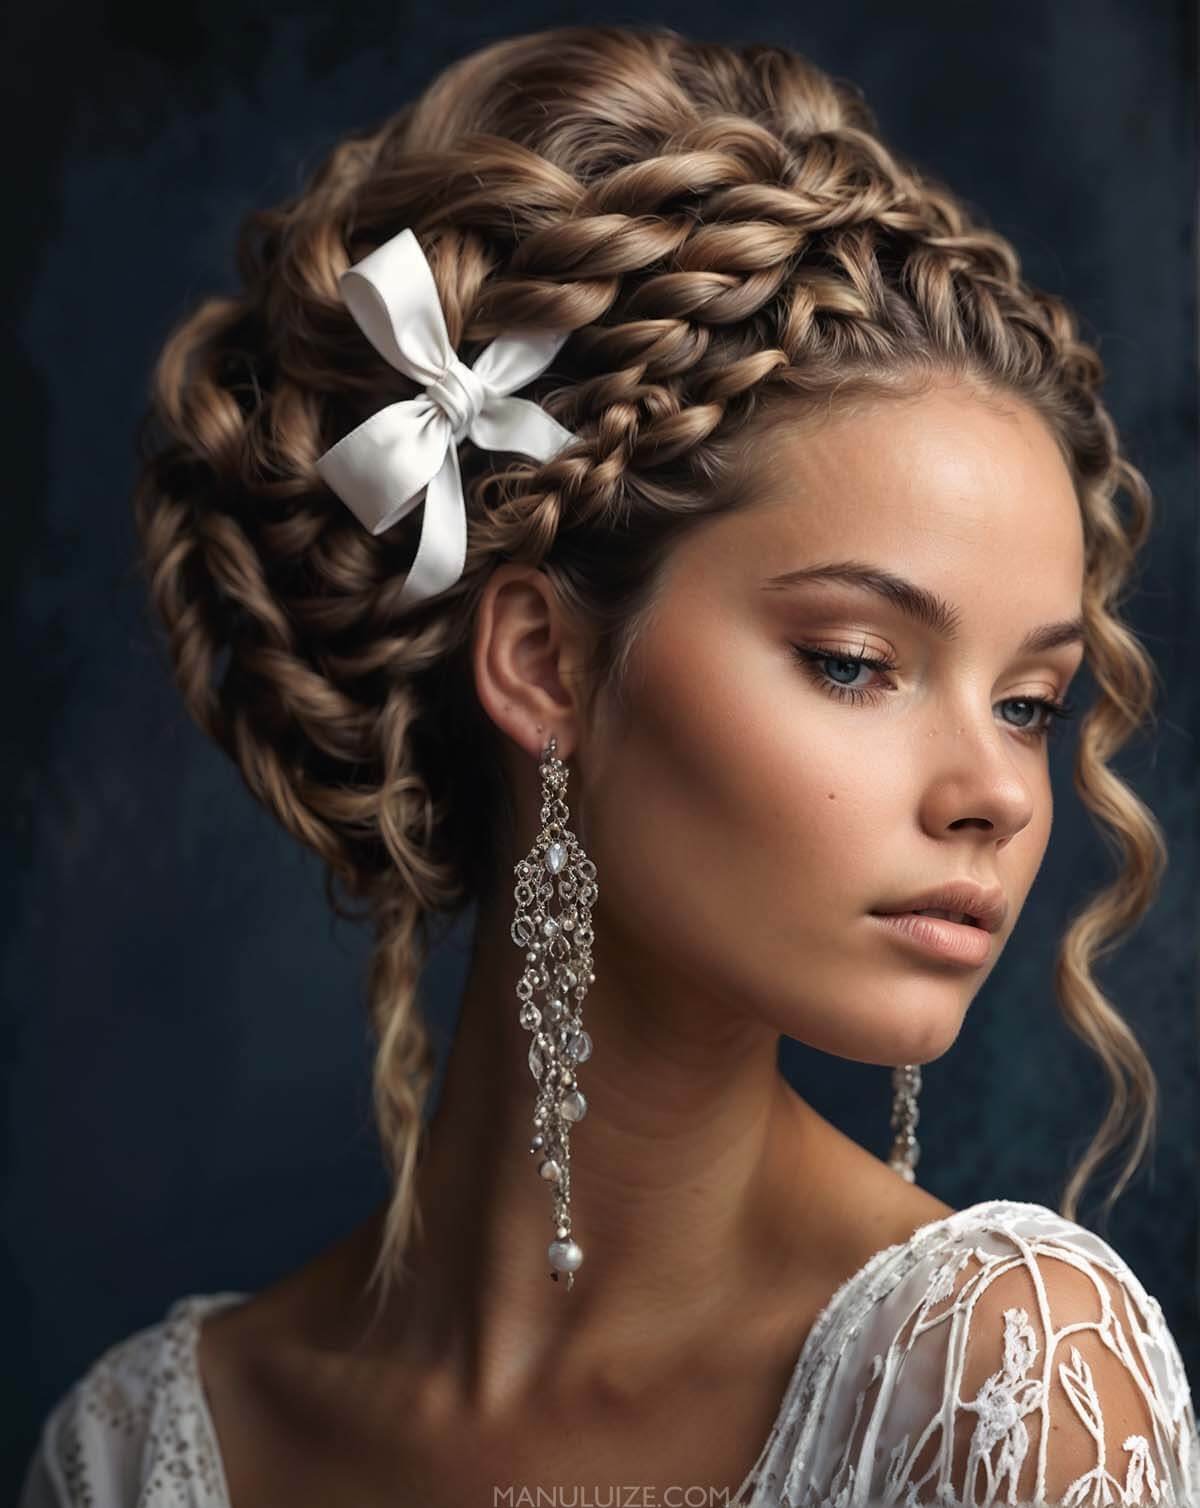 Boho braided updo with a white ribbon